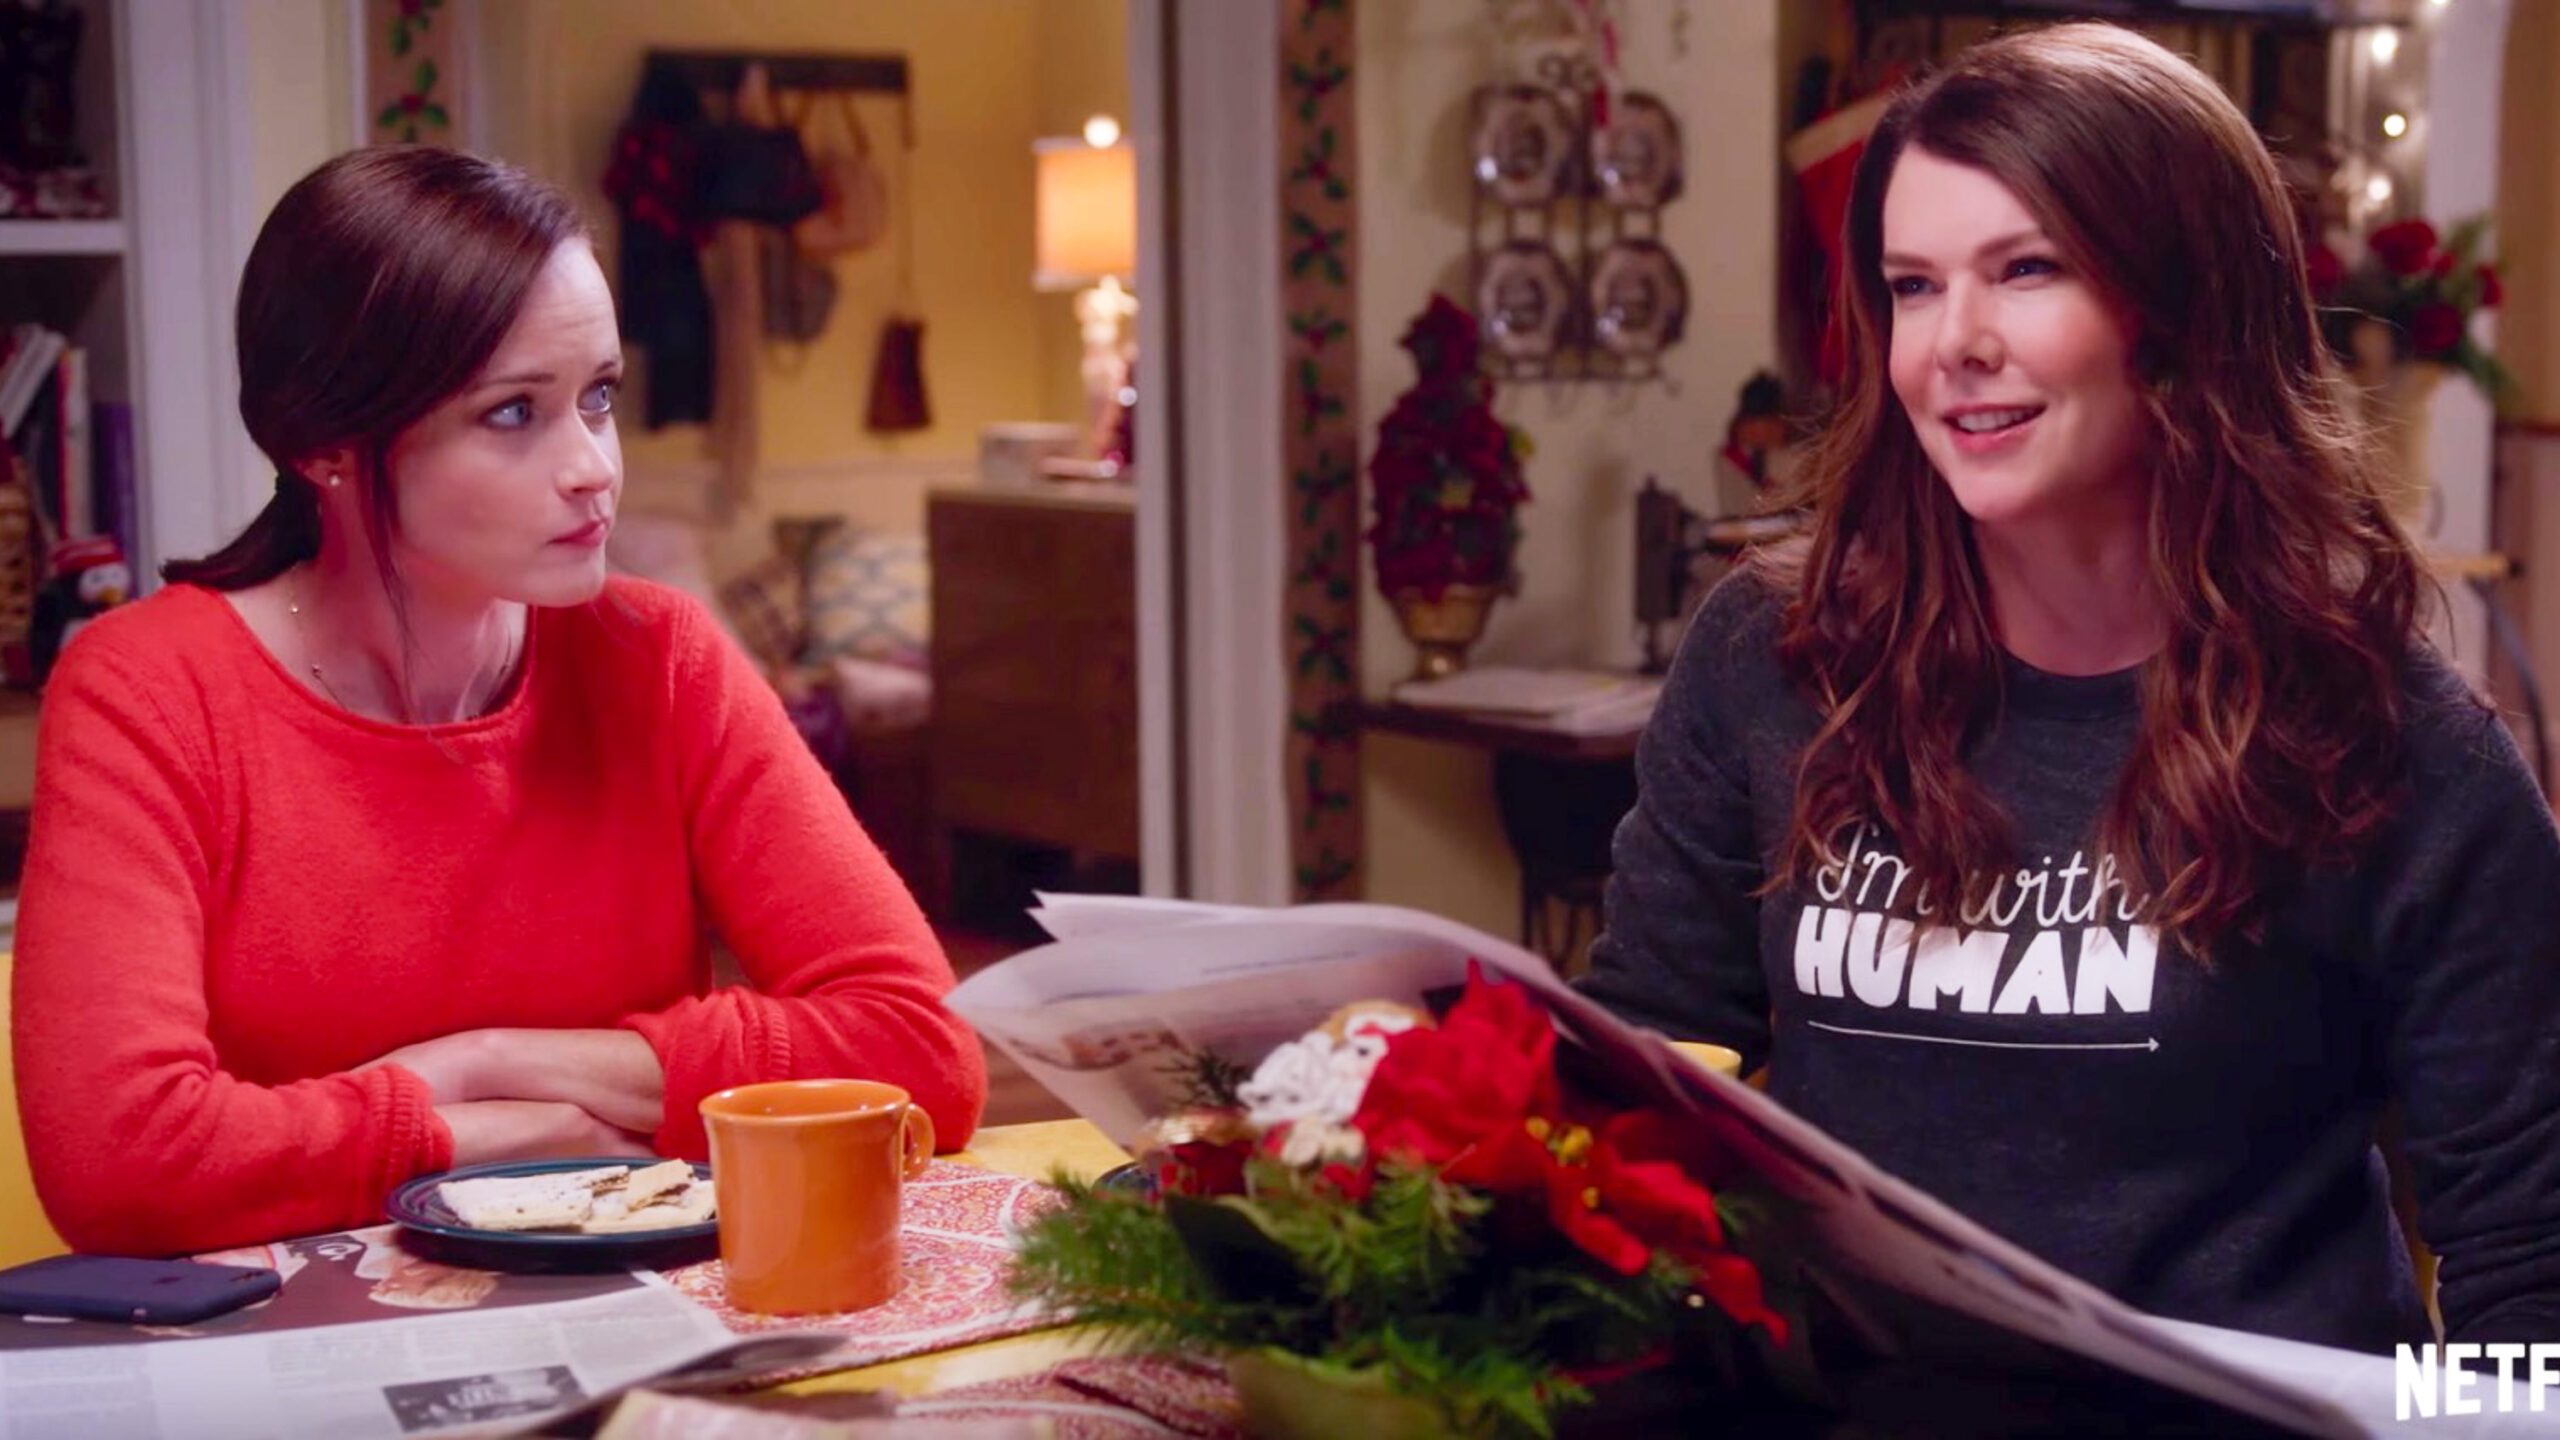 WATCH: First ‘Gilmore Girls’ revival trailer released